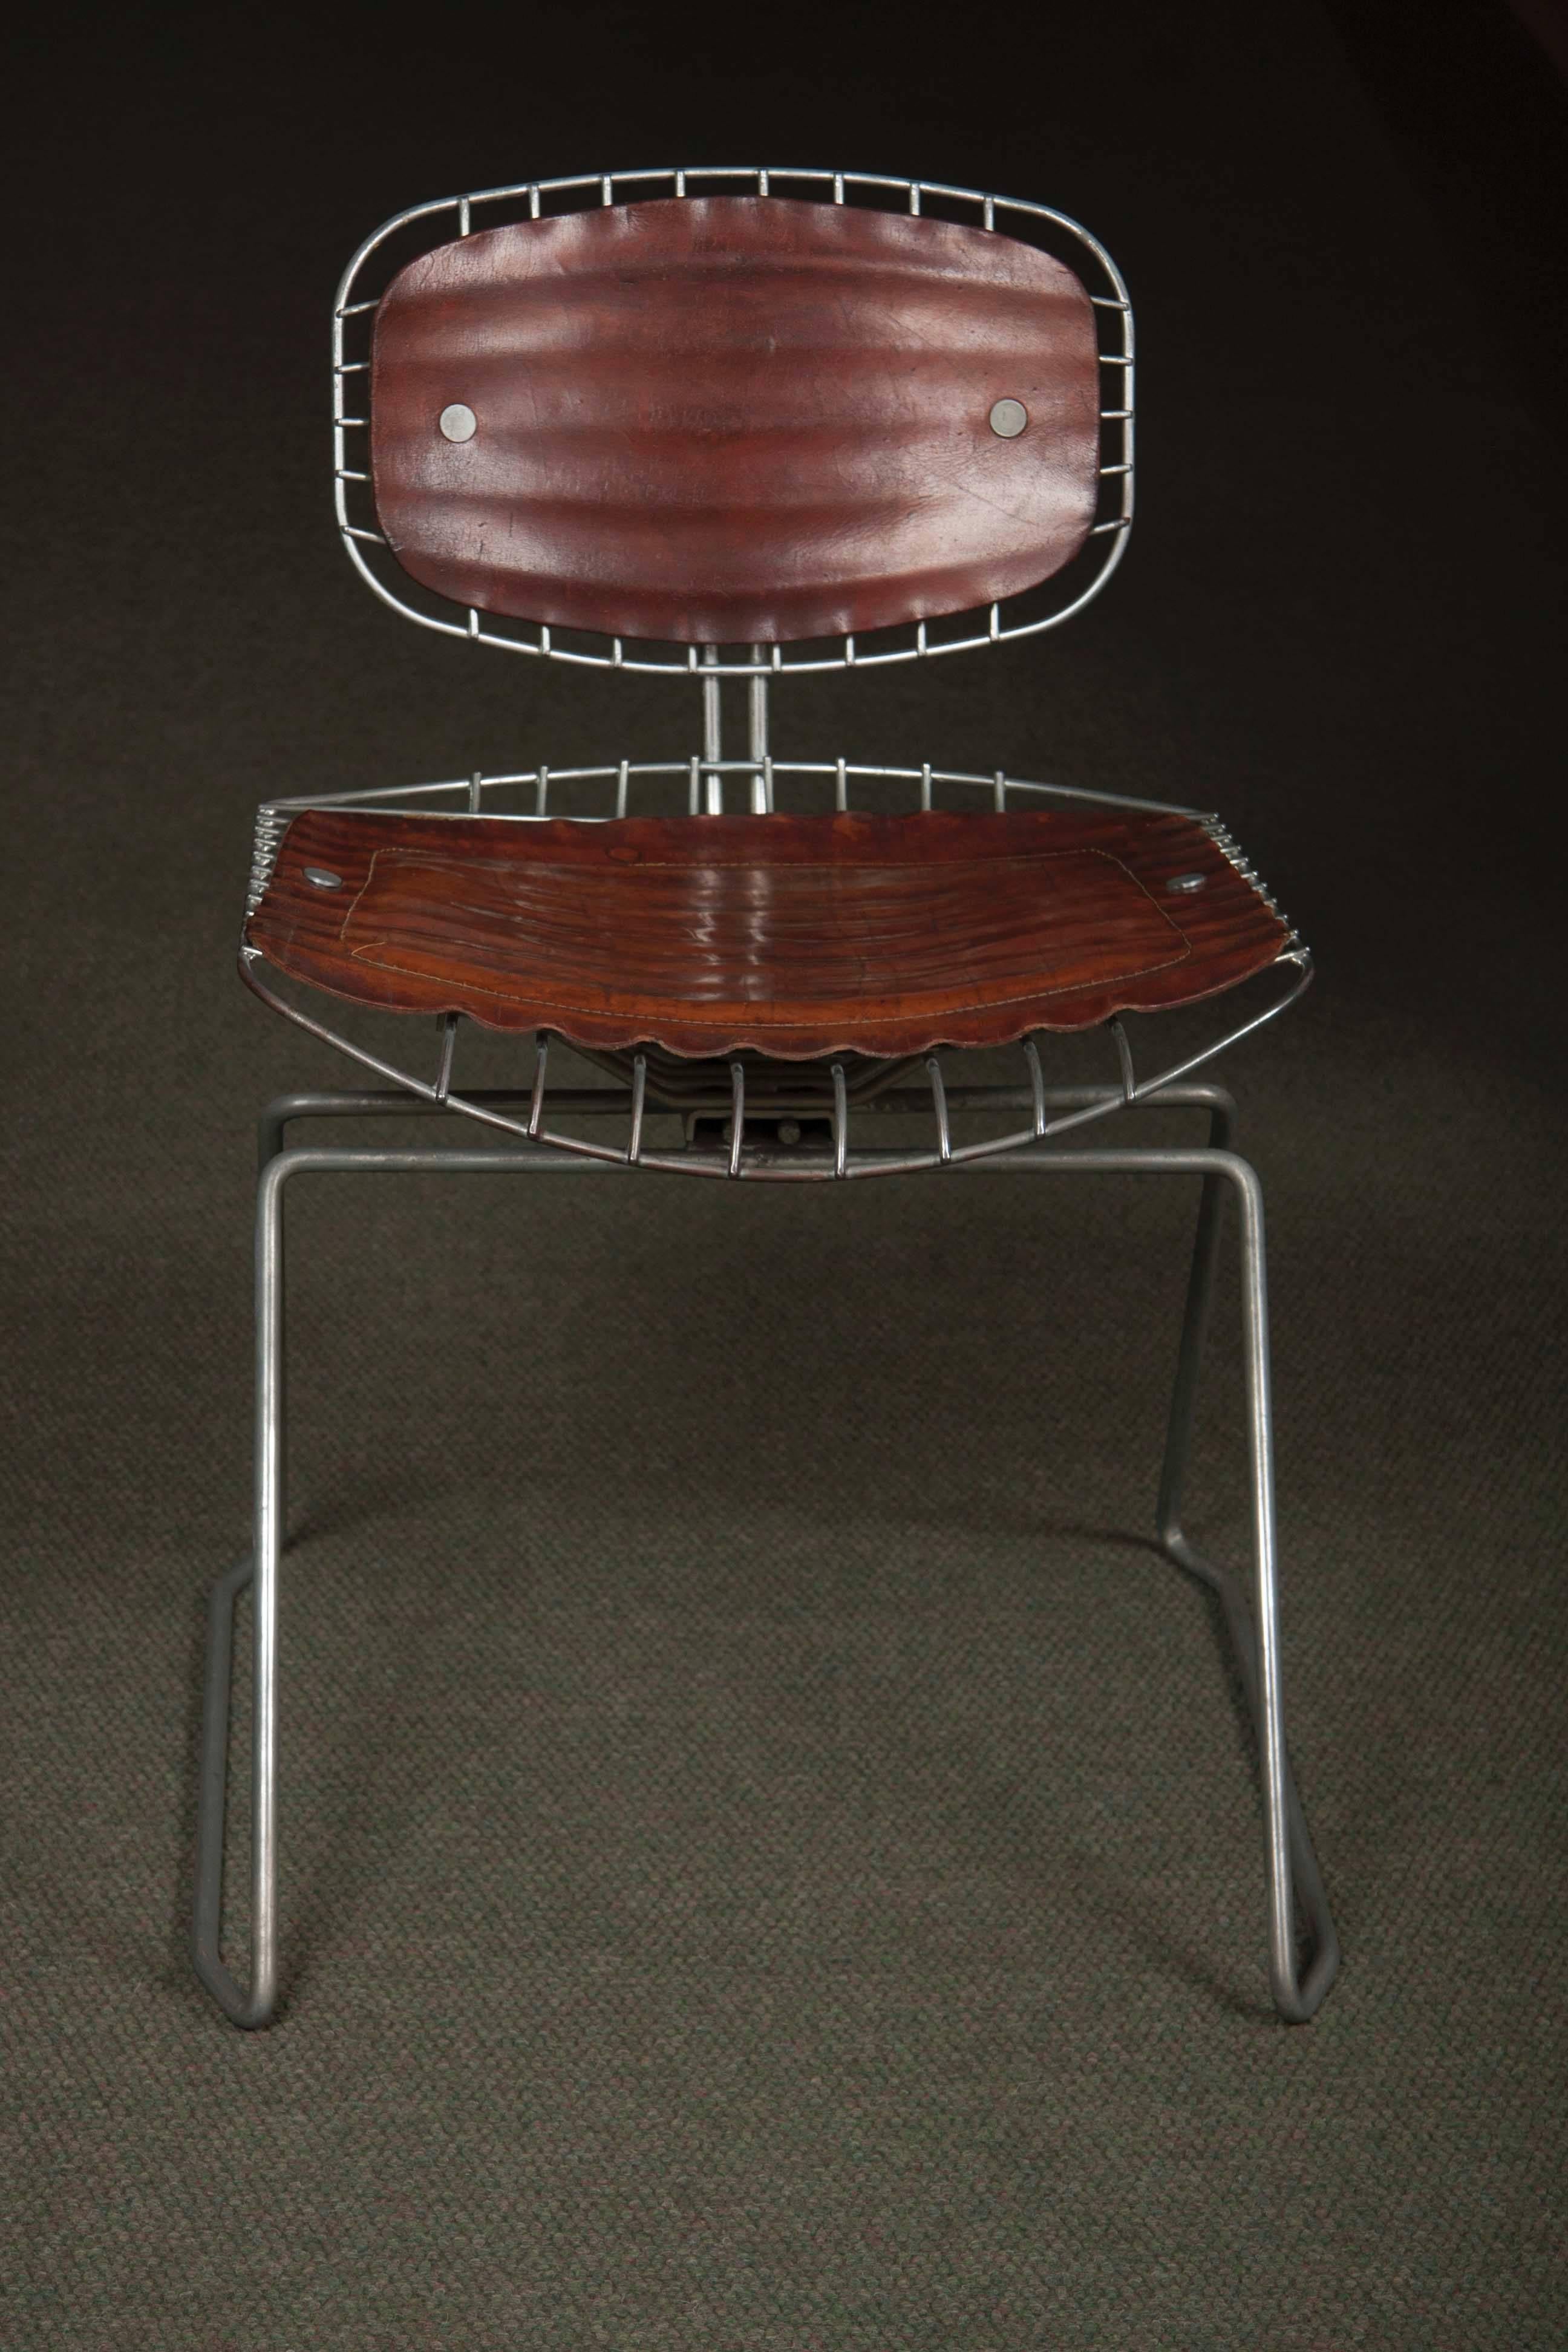 A matched set of eight Michel Cadestin and Georges Laurent leather and metal Beaubourg chairs, from the Centre Georges Pompidou, Paris. These chairs were designed in 1976 for the competition to determine which chairs would be used in the Pompidou